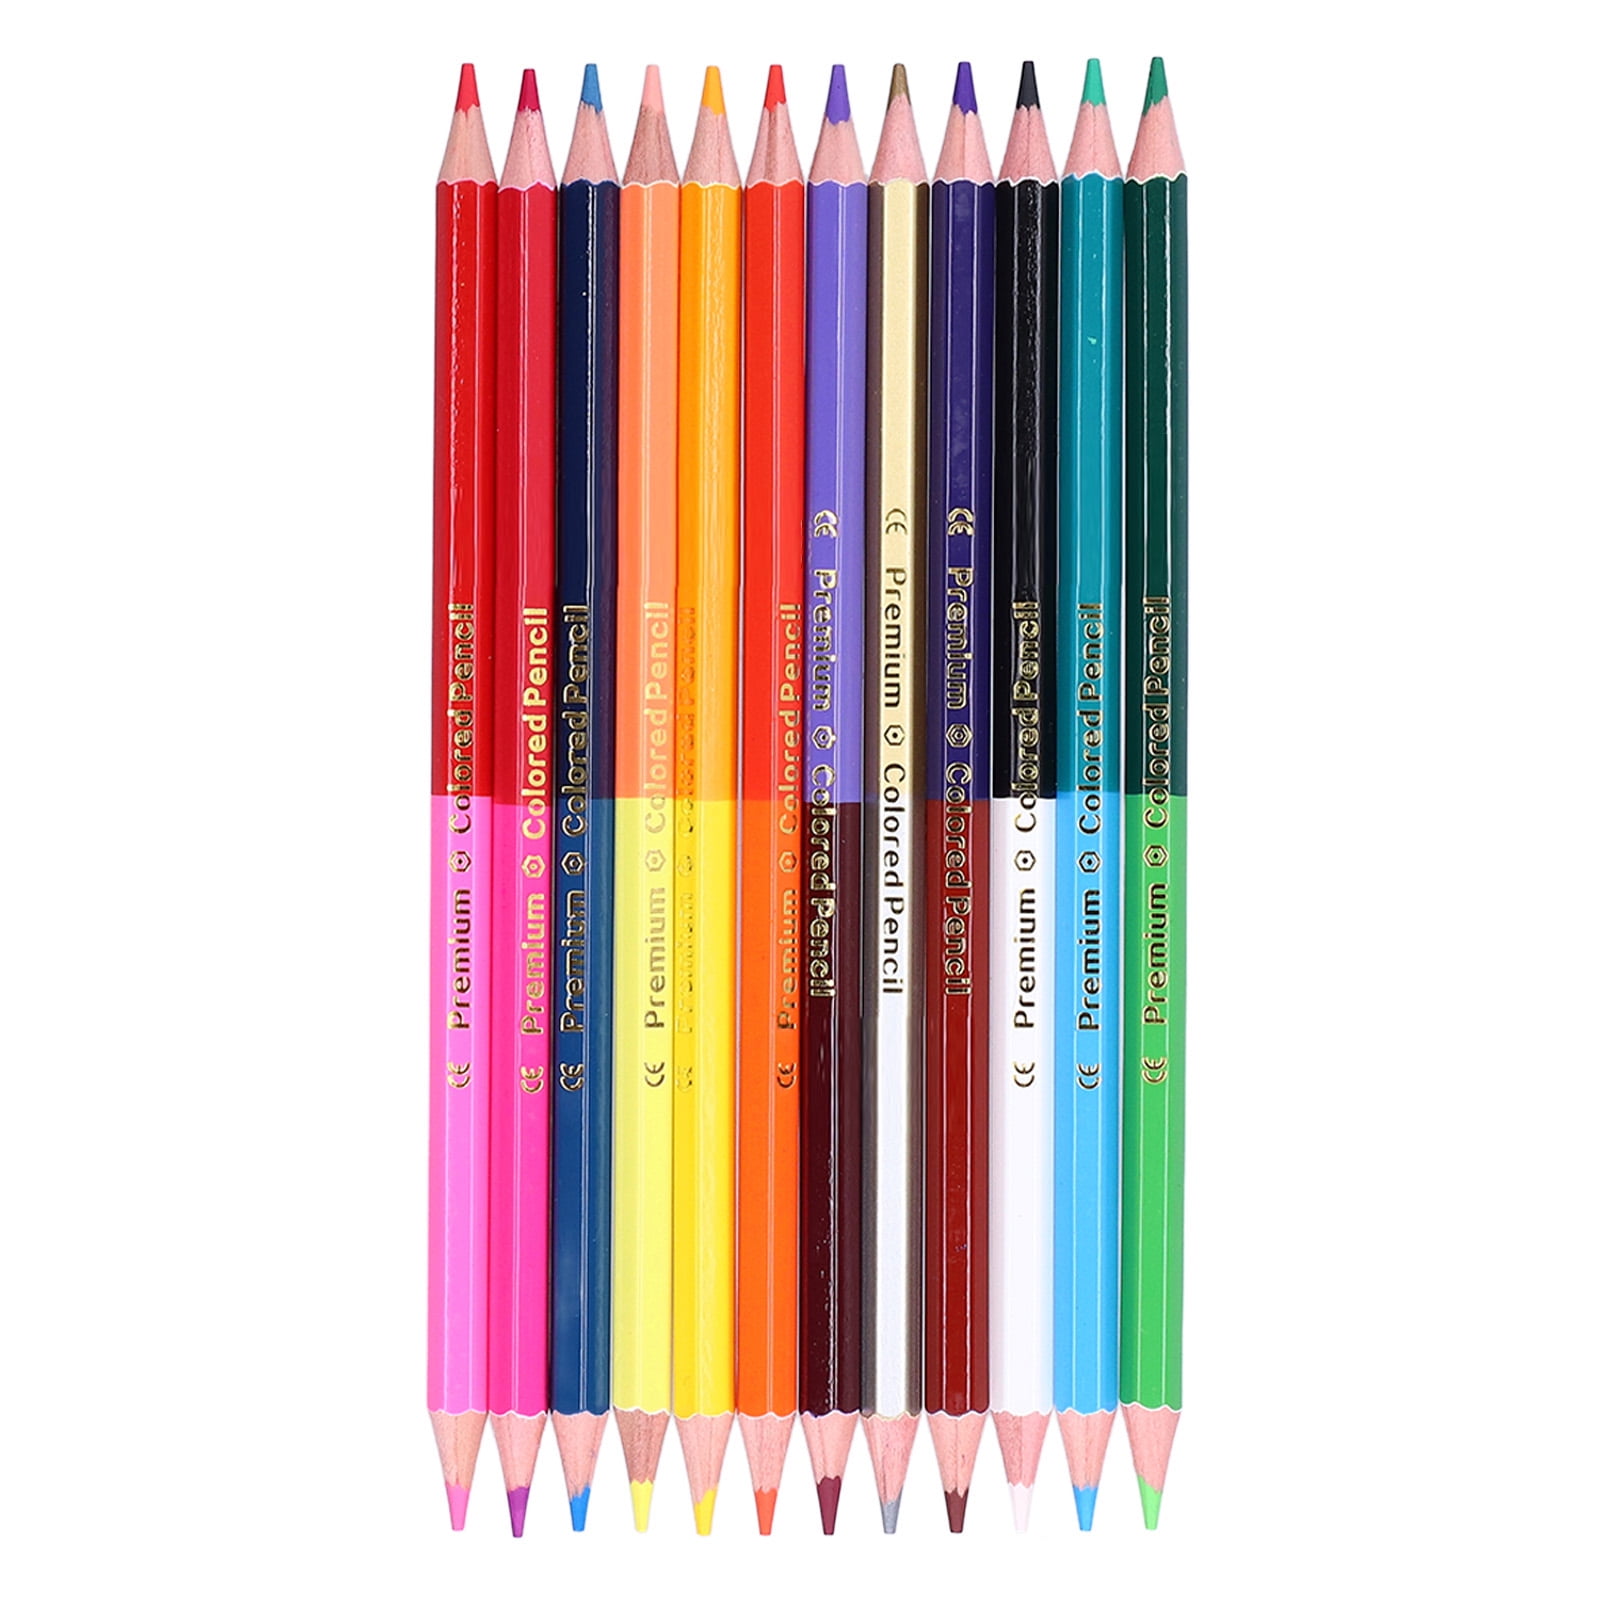 Colored Pencils - Set of 10 (Copy) — COLORING OVER CANCER